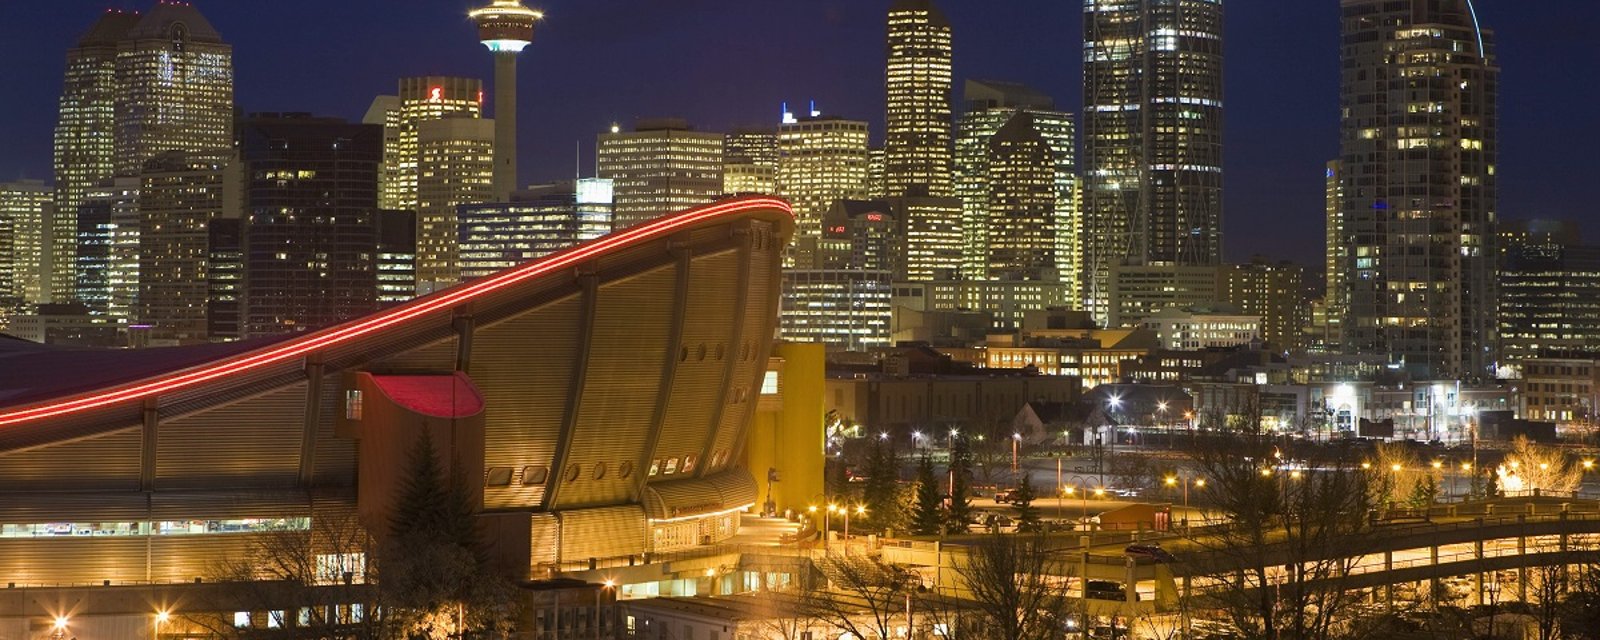 Flames step up again, this time for the Calgary community.